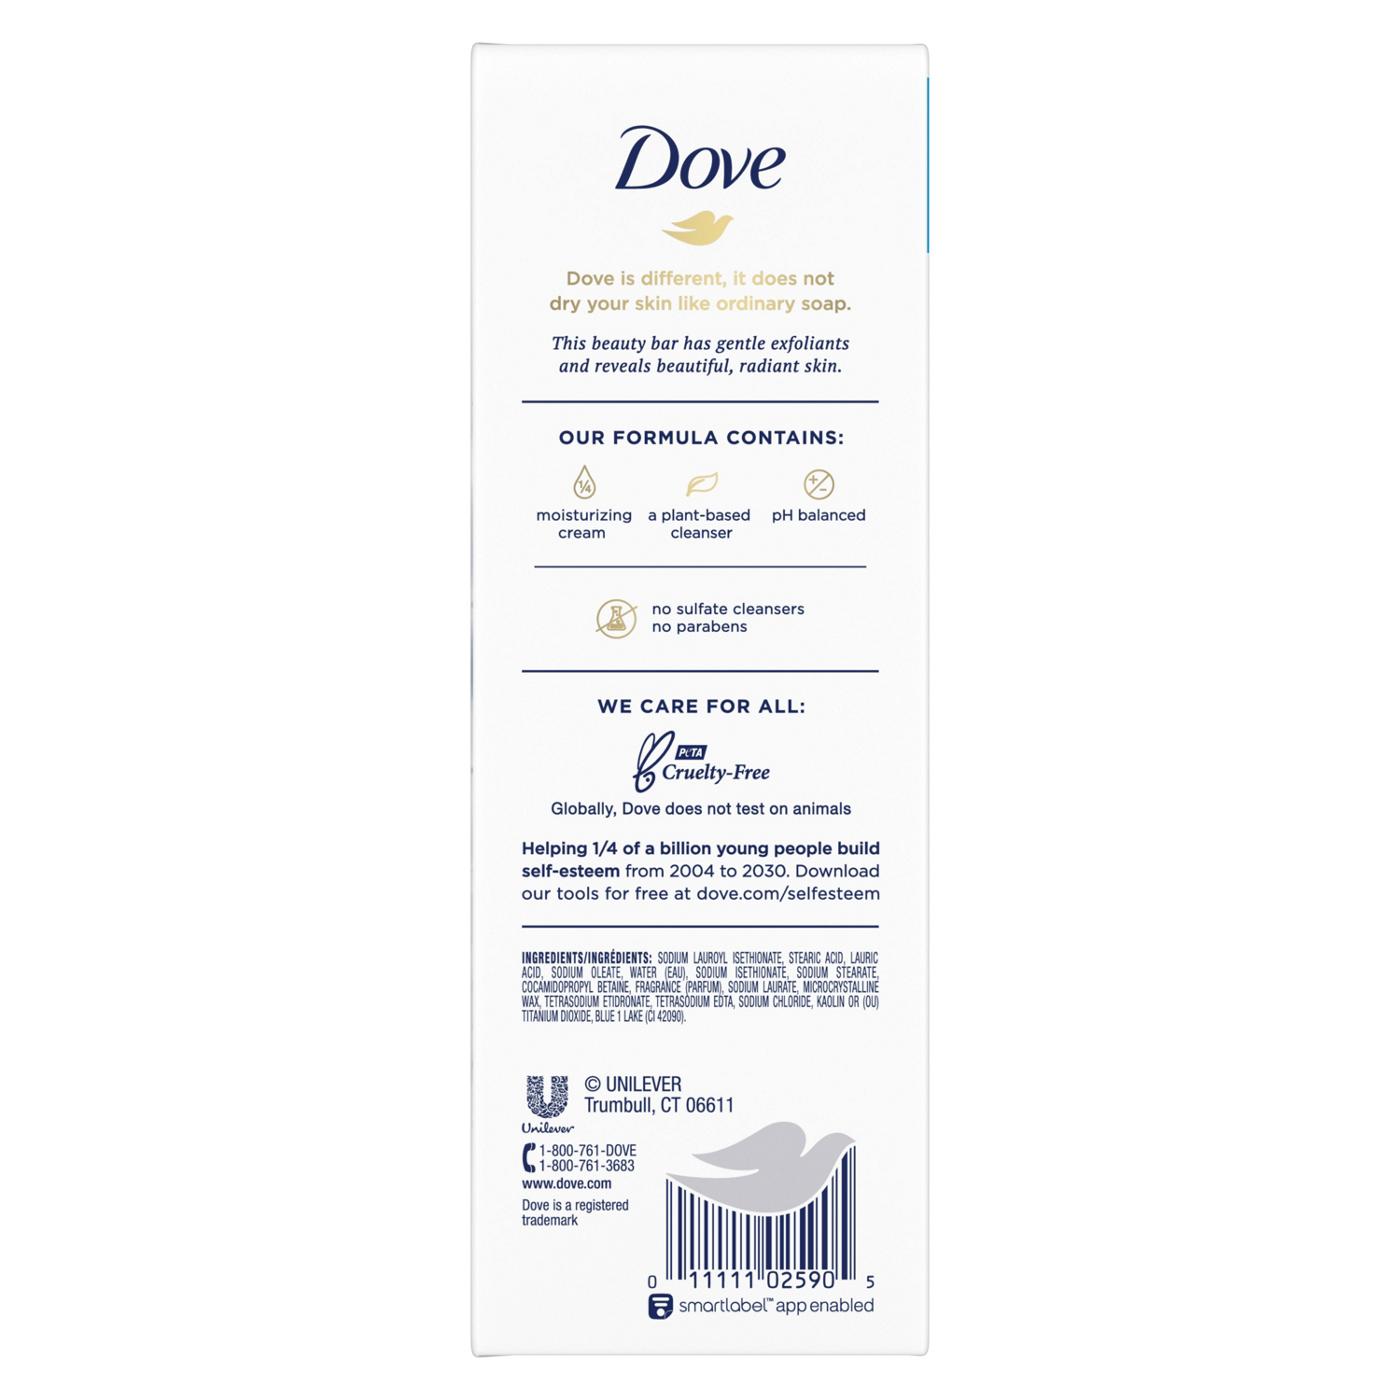 Dove Beauty Bar Gentle Exfoliating With Mild Cleanser; image 4 of 4